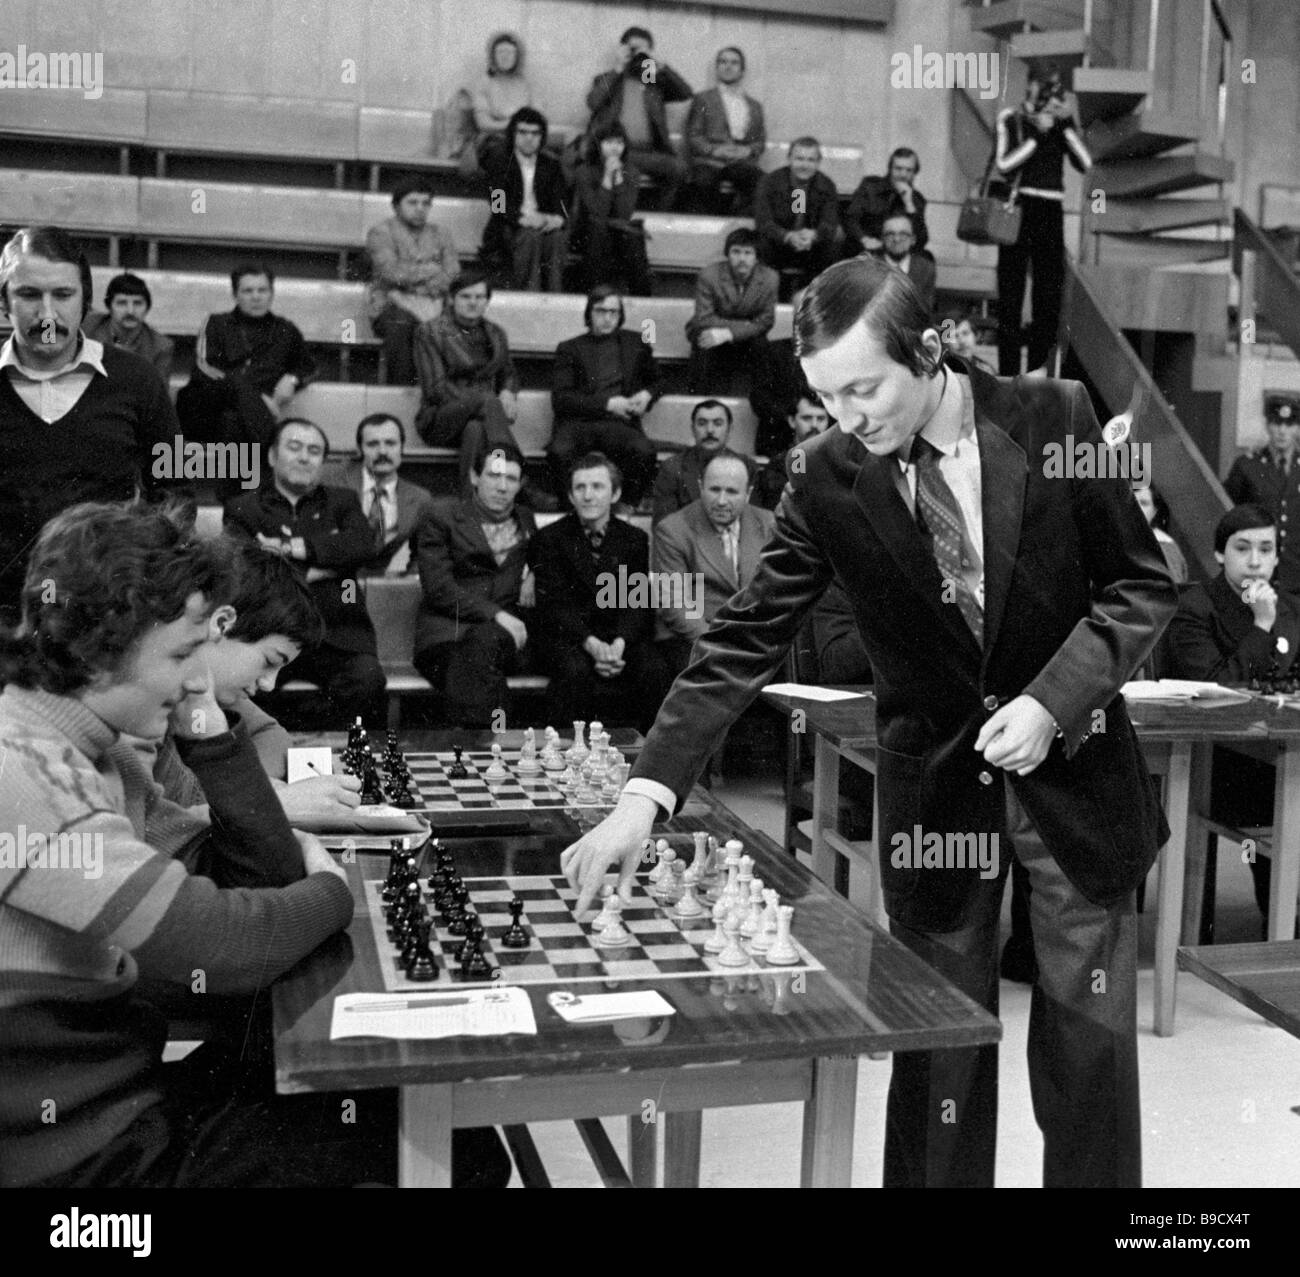 World champion Anatoly Karpov during simultaneous exhibition against young  chess players Stock Photo - Alamy